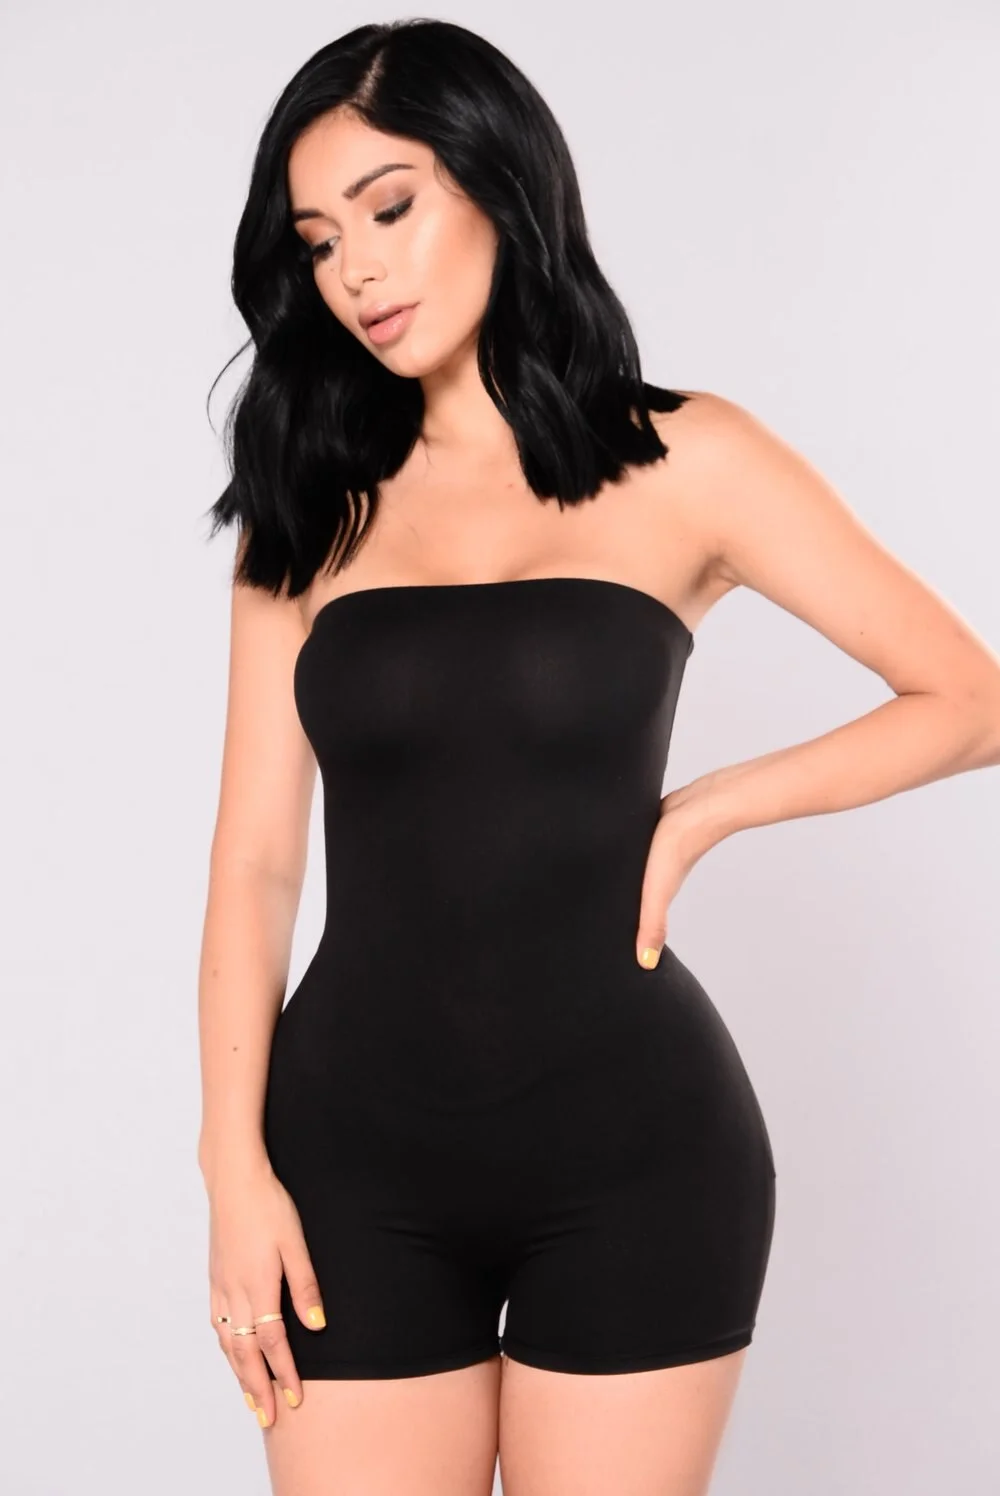 Women Club Fitness Romper Sexy One Piece Sleeveless Tube Backless Bodycon Jumpsuits Playsuits Shorts Tracksuits Clothes Summer